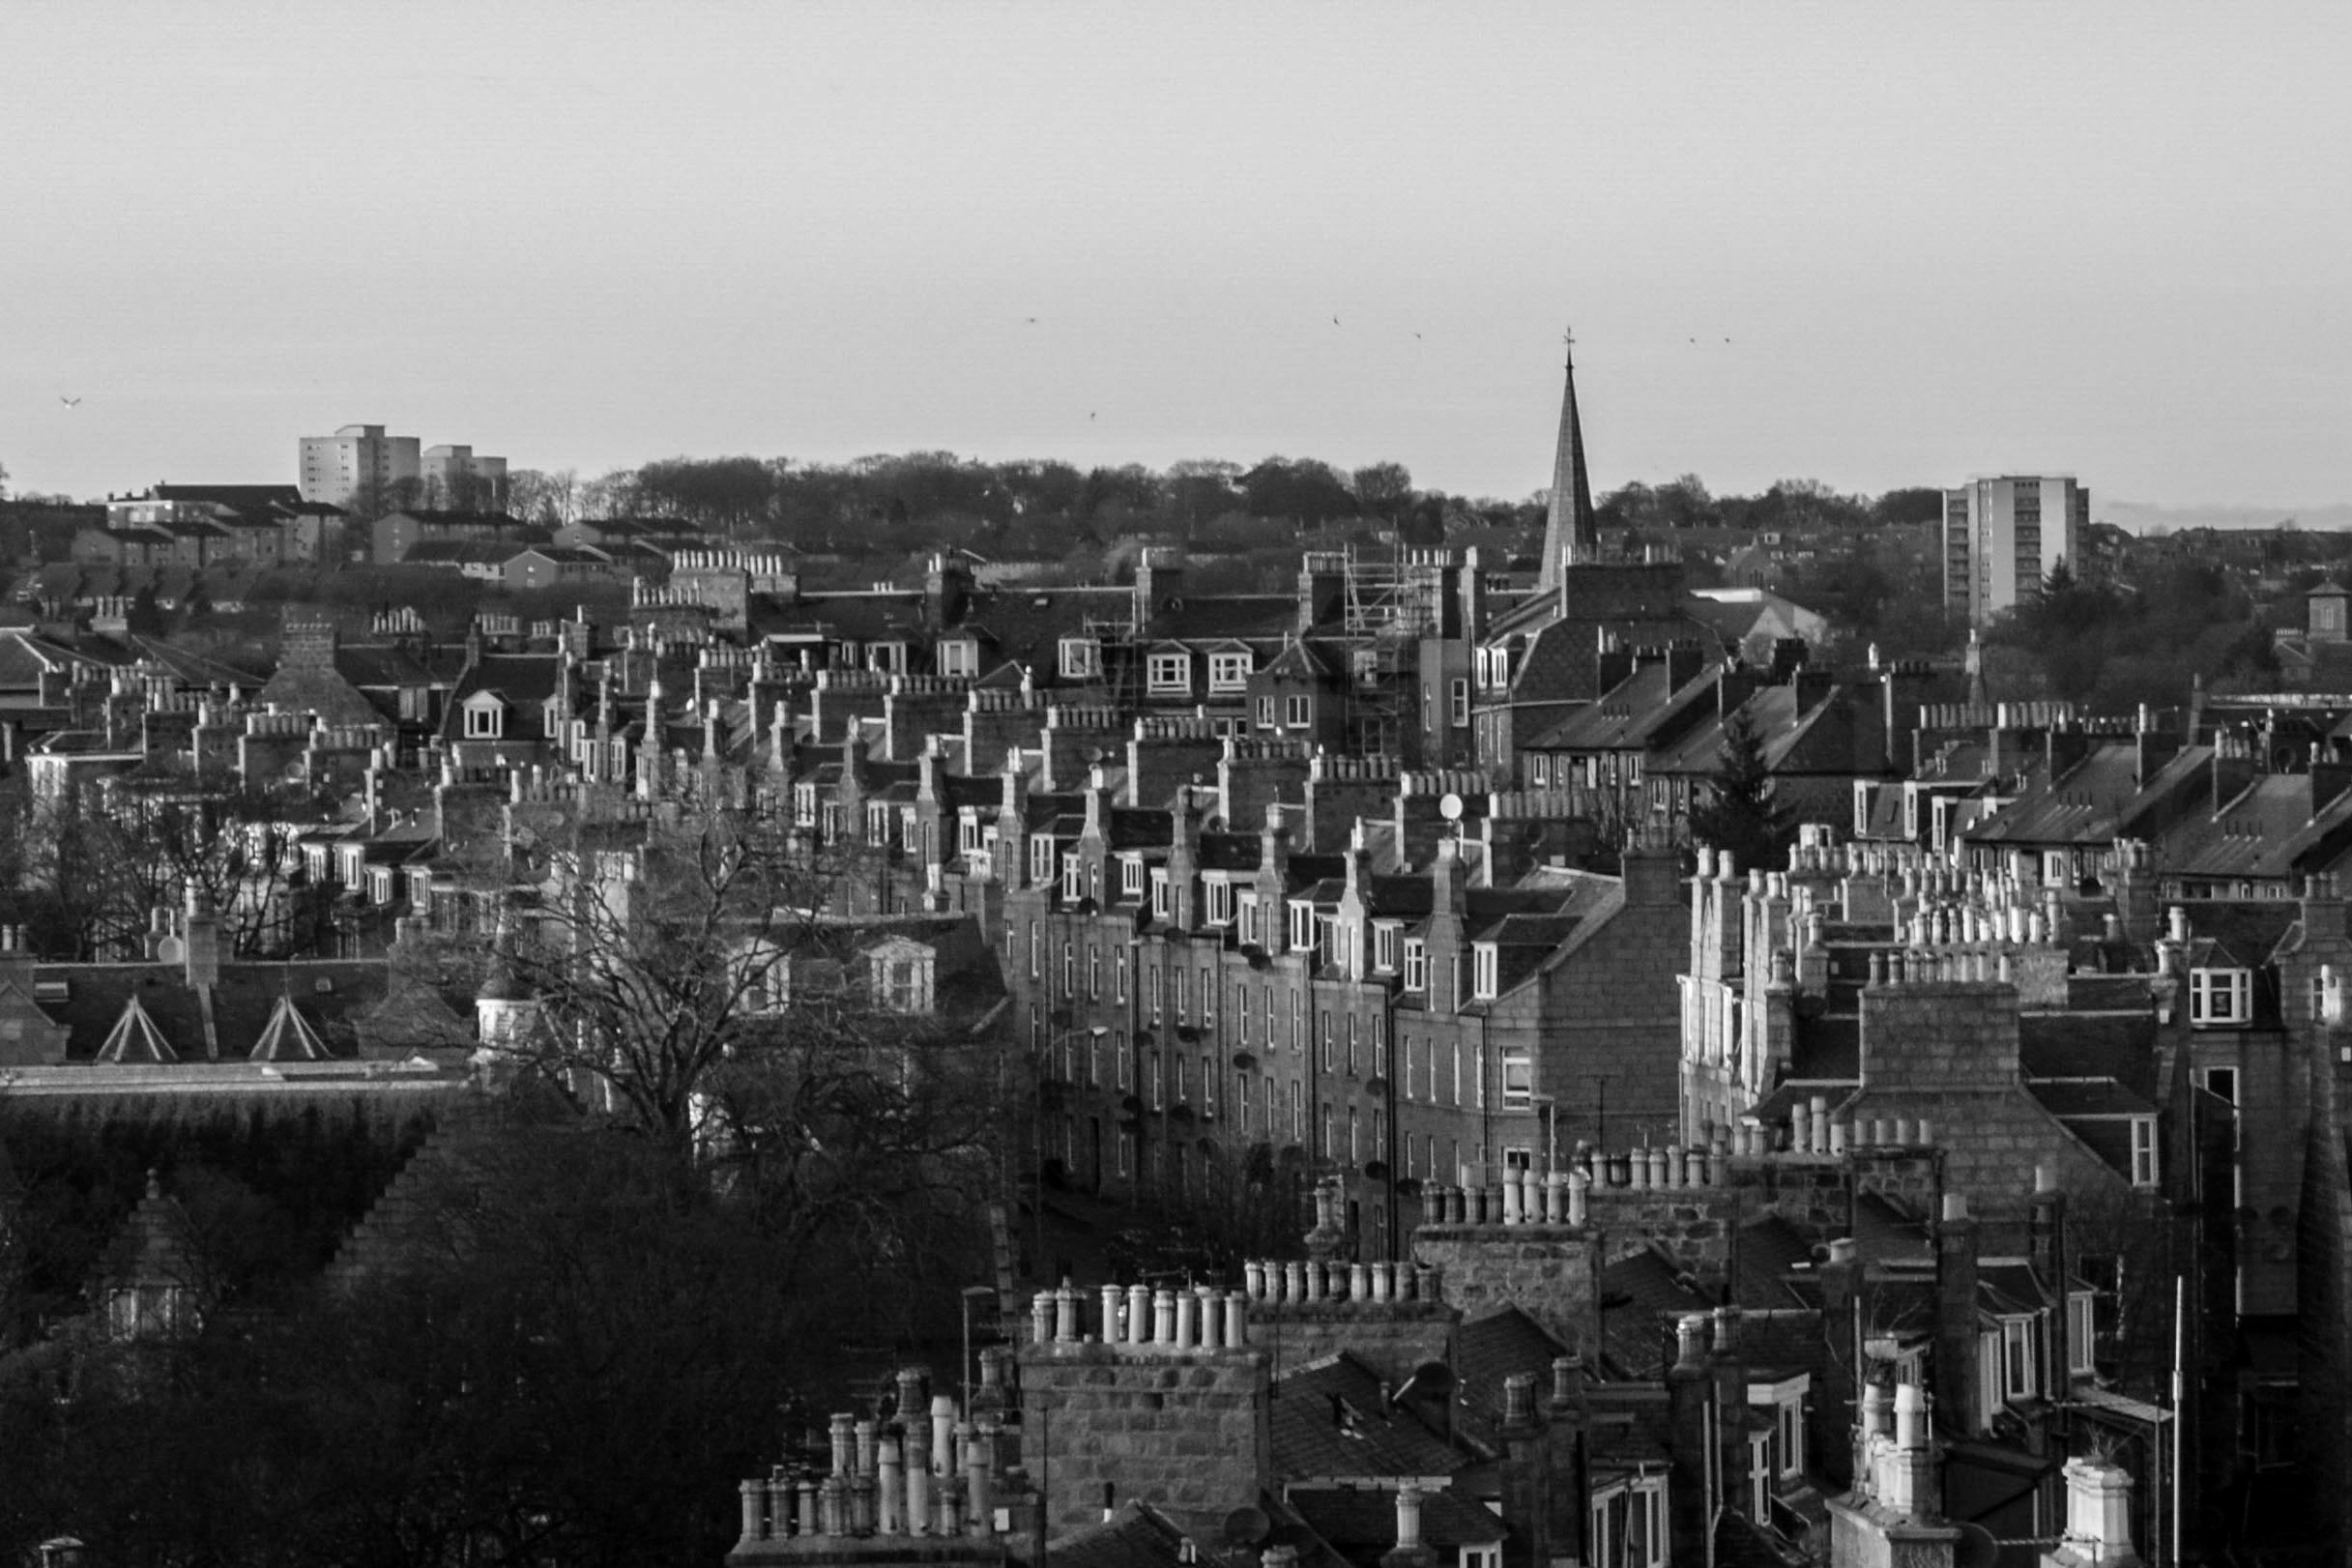 A view across Aberdeen with a diagonal row of houses